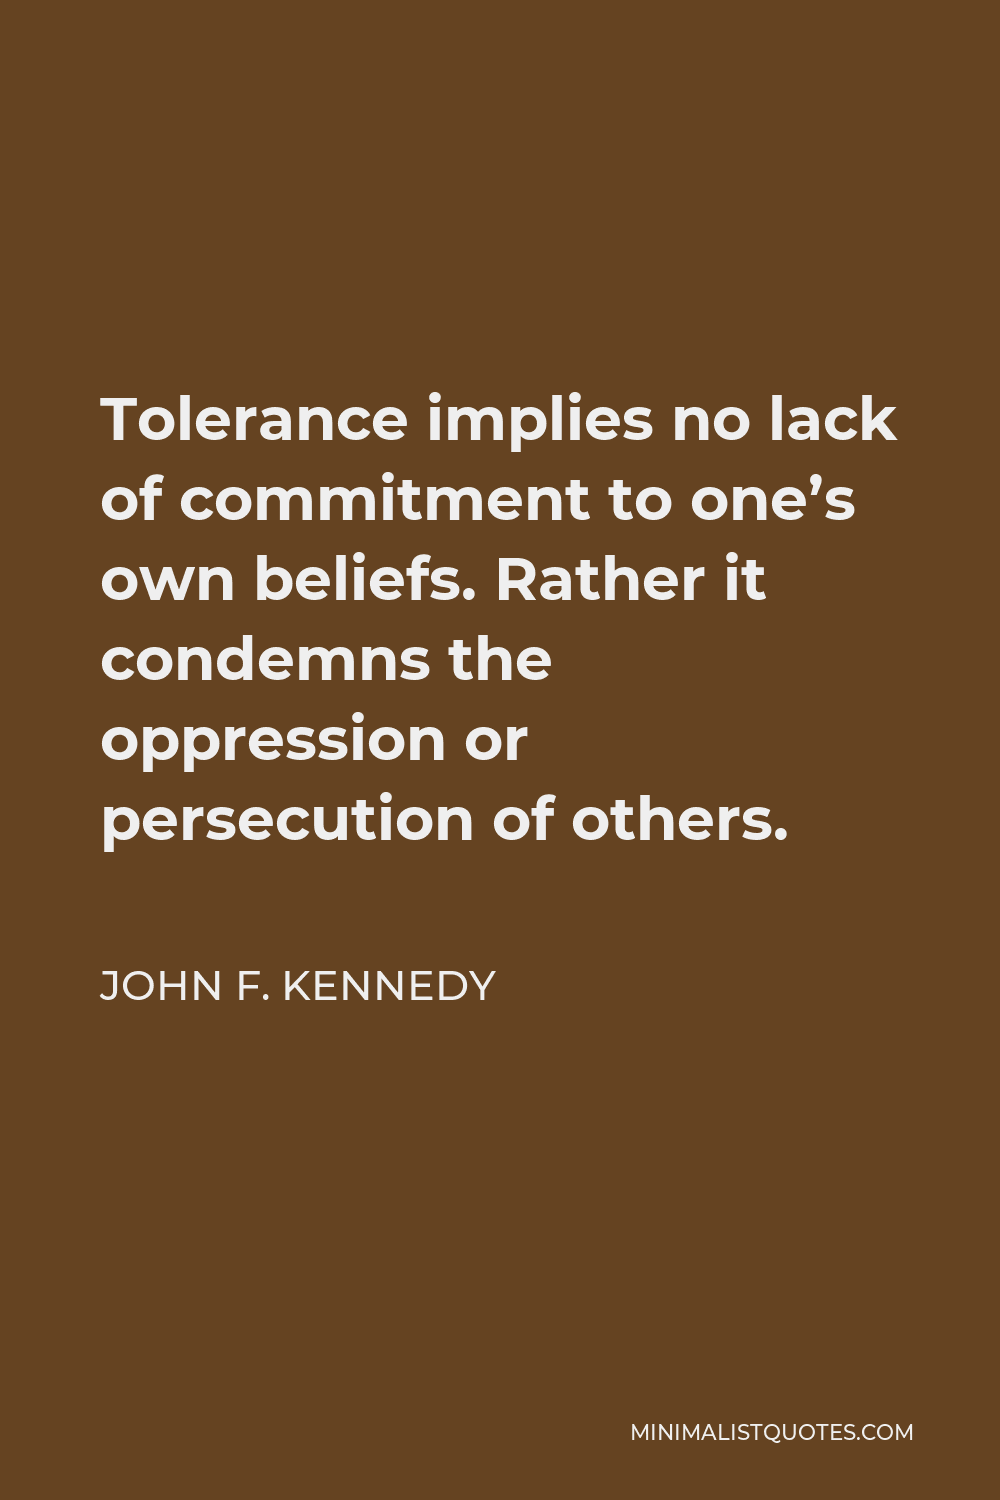 John F. Kennedy Quote - Tolerance implies no lack of commitment to one’s own beliefs. Rather it condemns the oppression or persecution of others.